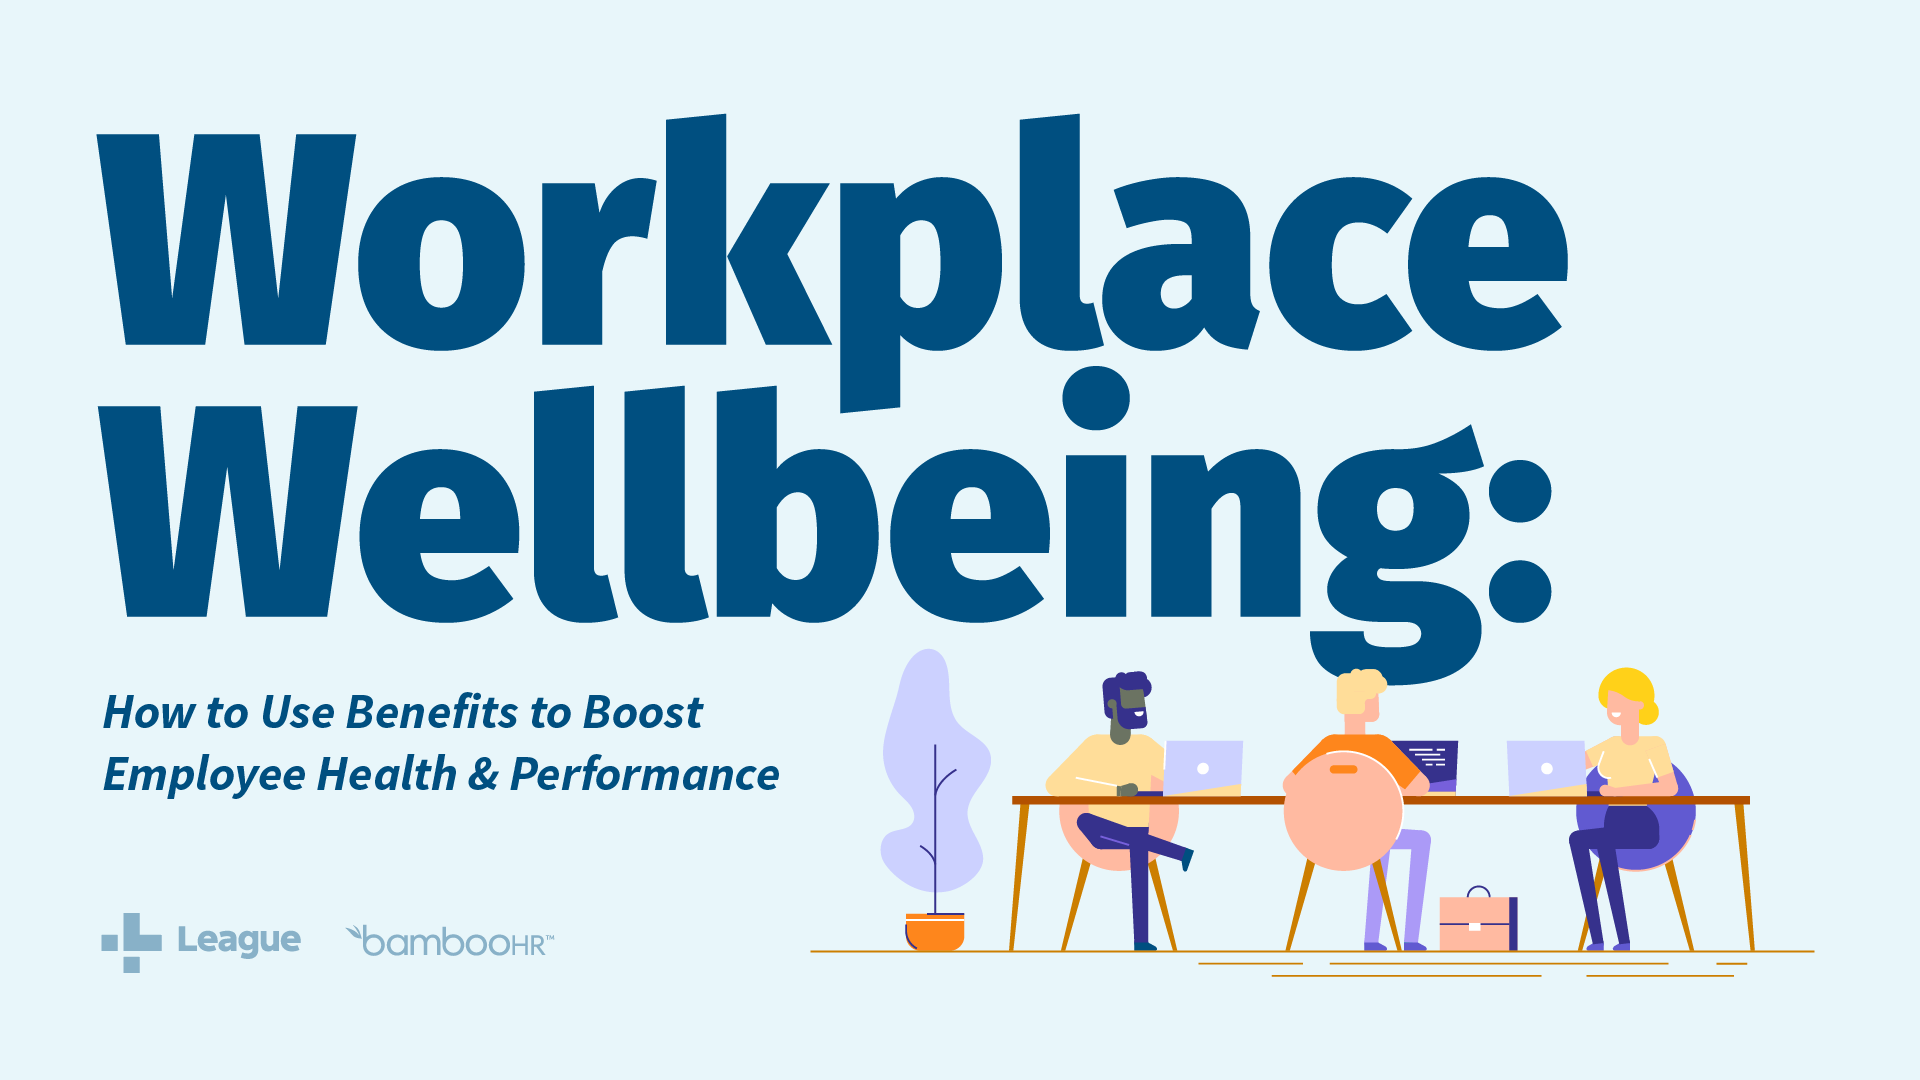 Workplace Wellbeing: How to Use Benefits to Boost Employee Health & Performance